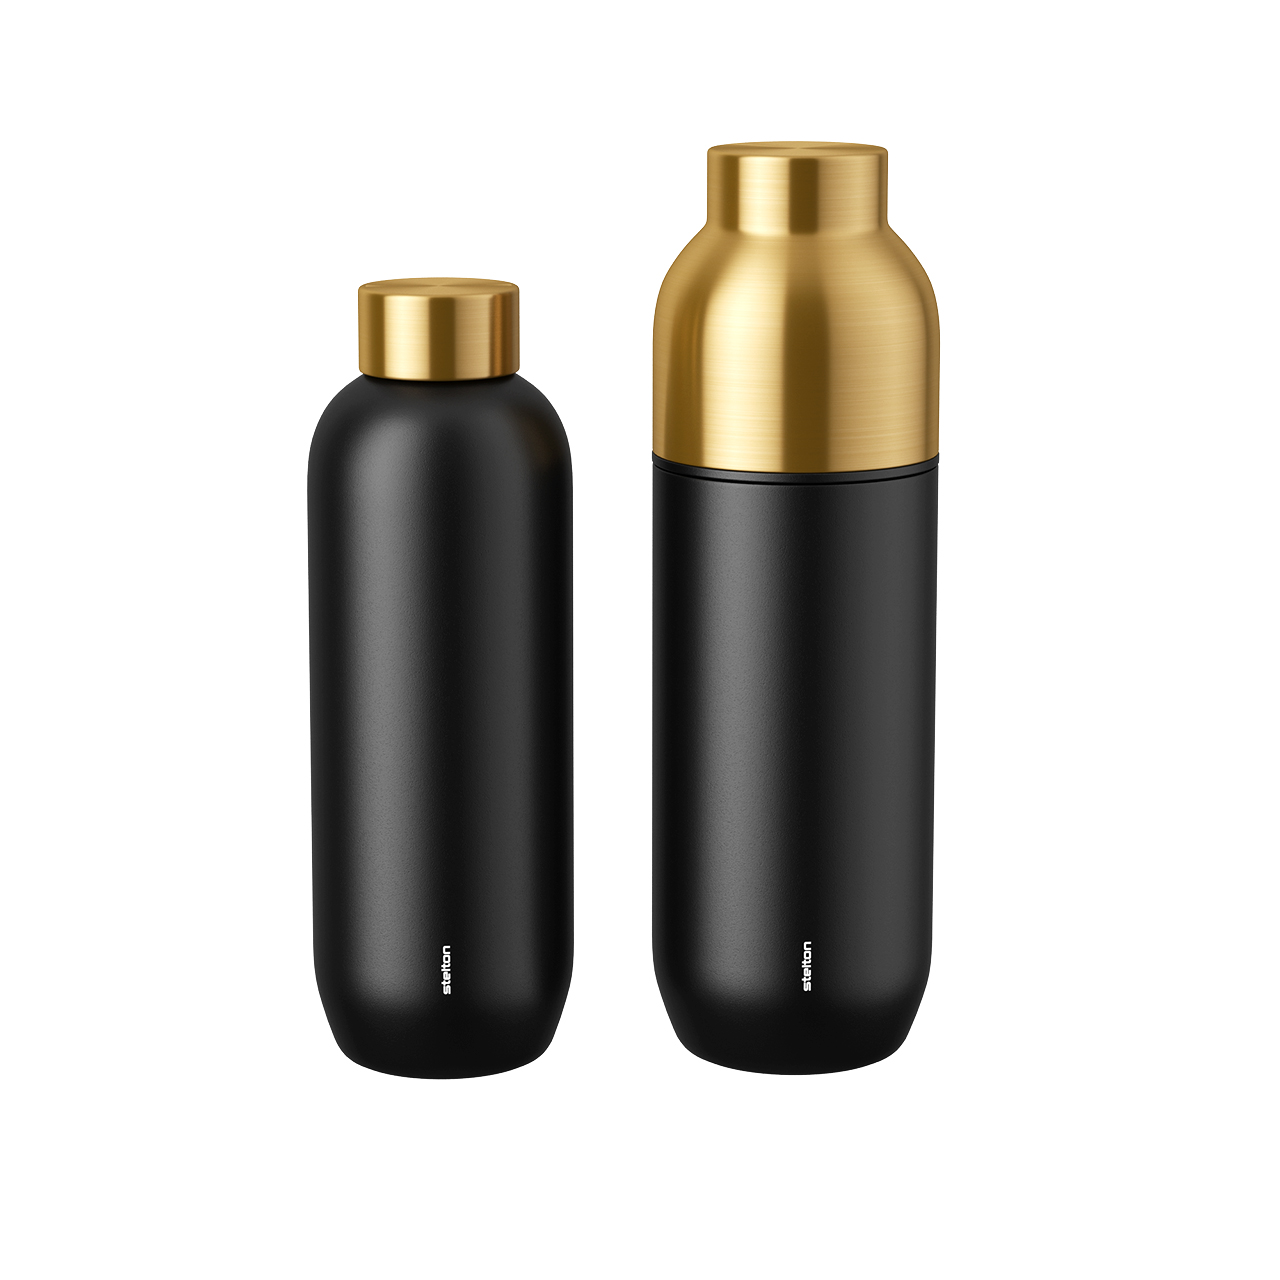 Collar Water and Thermo Bottle by Stelton